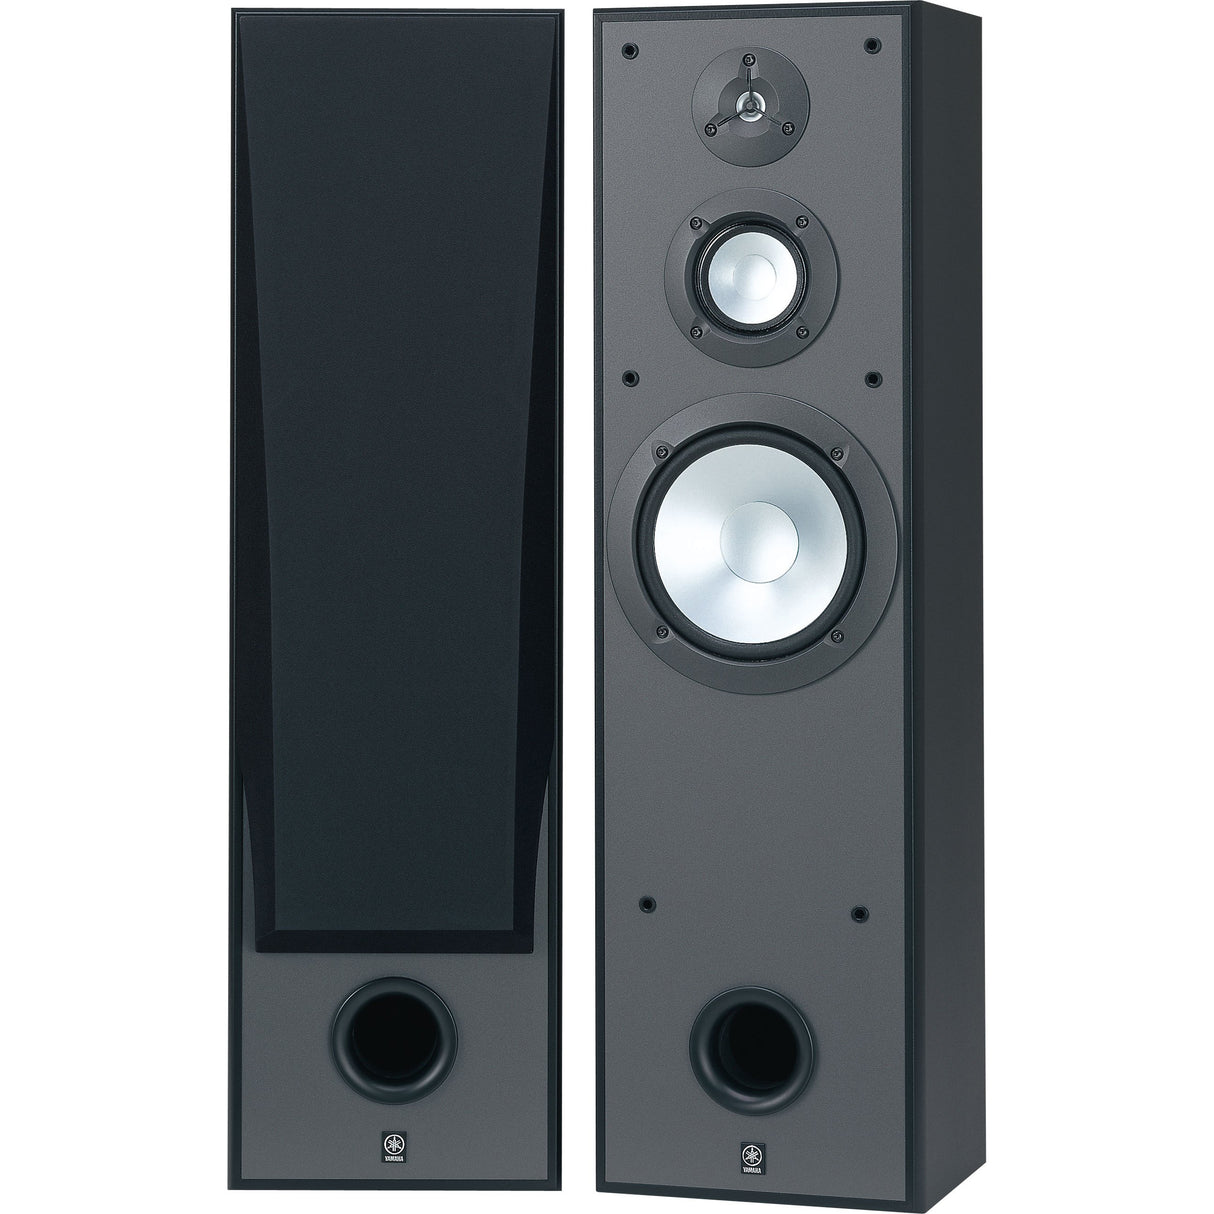 Yamaha RS-202 Stereo Receiver + Yamaha NS-8390 Floor Standing Speakers (Stereo Bundle Pack)